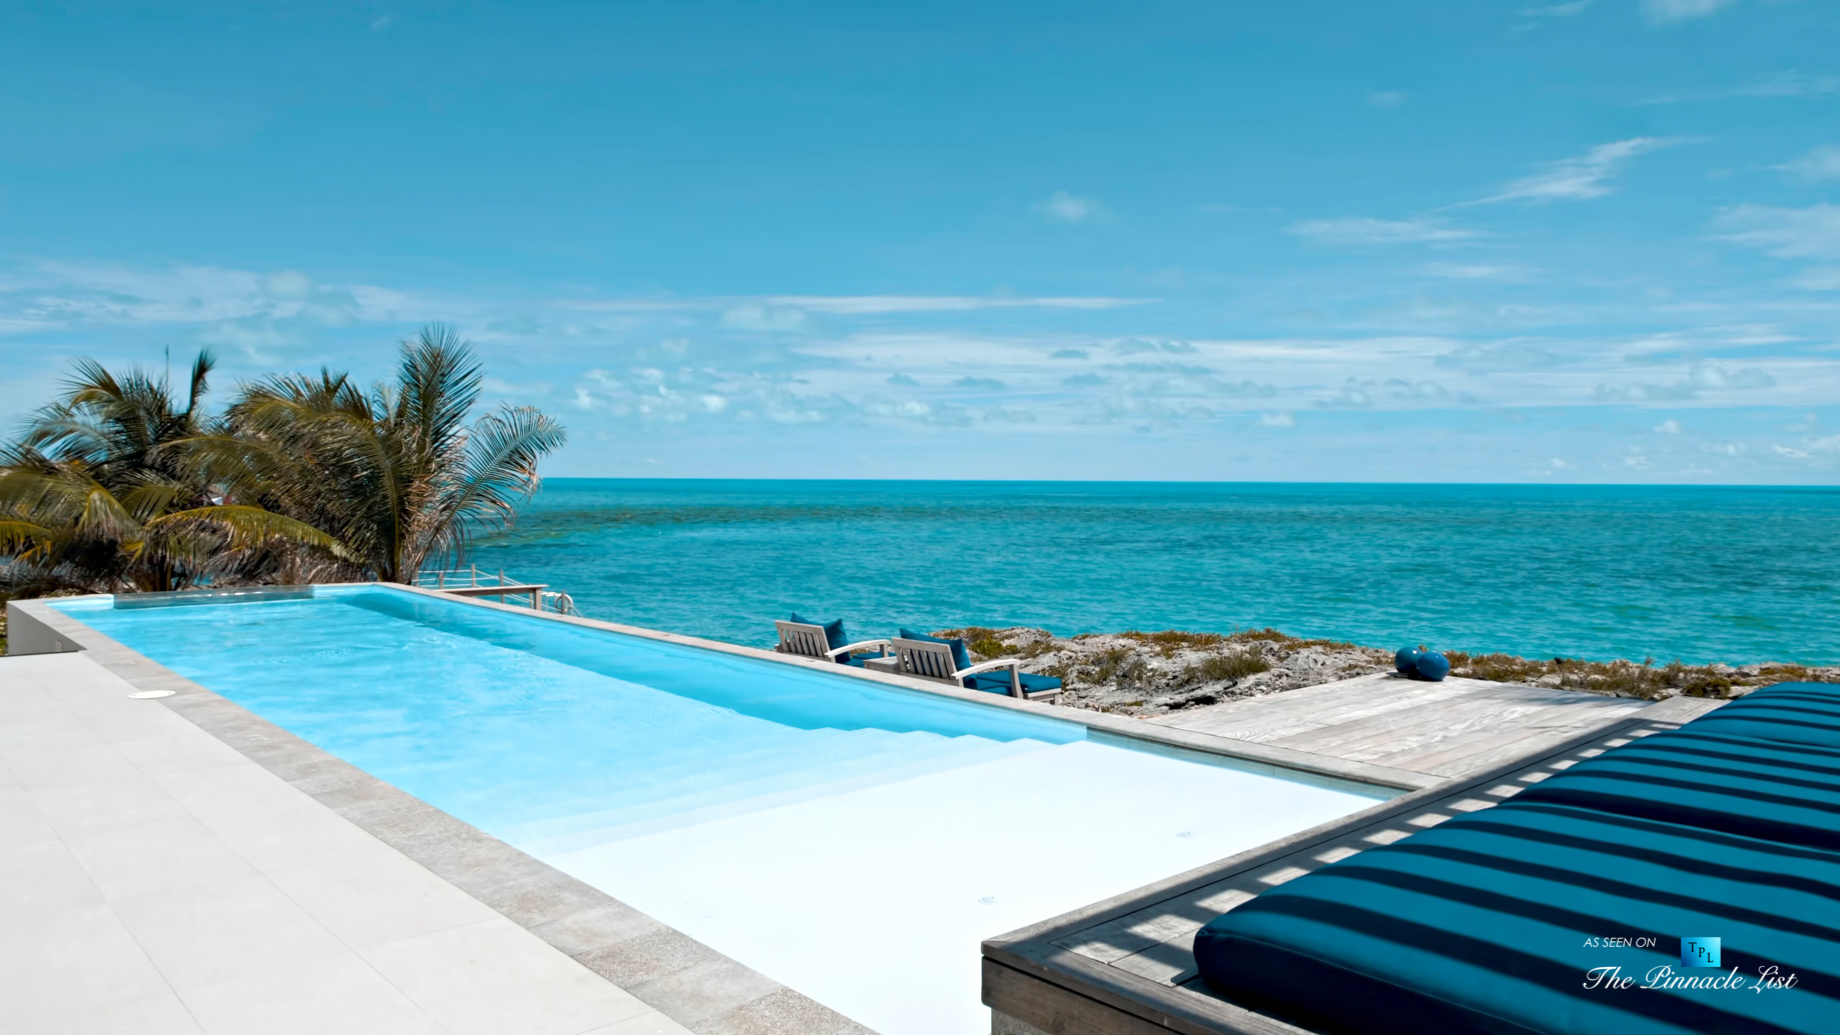 Tip of the Tail Villa – Providenciales, Turks and Caicos Islands – Infinity Pool View – Luxury Real Estate – South Shore Peninsula Home